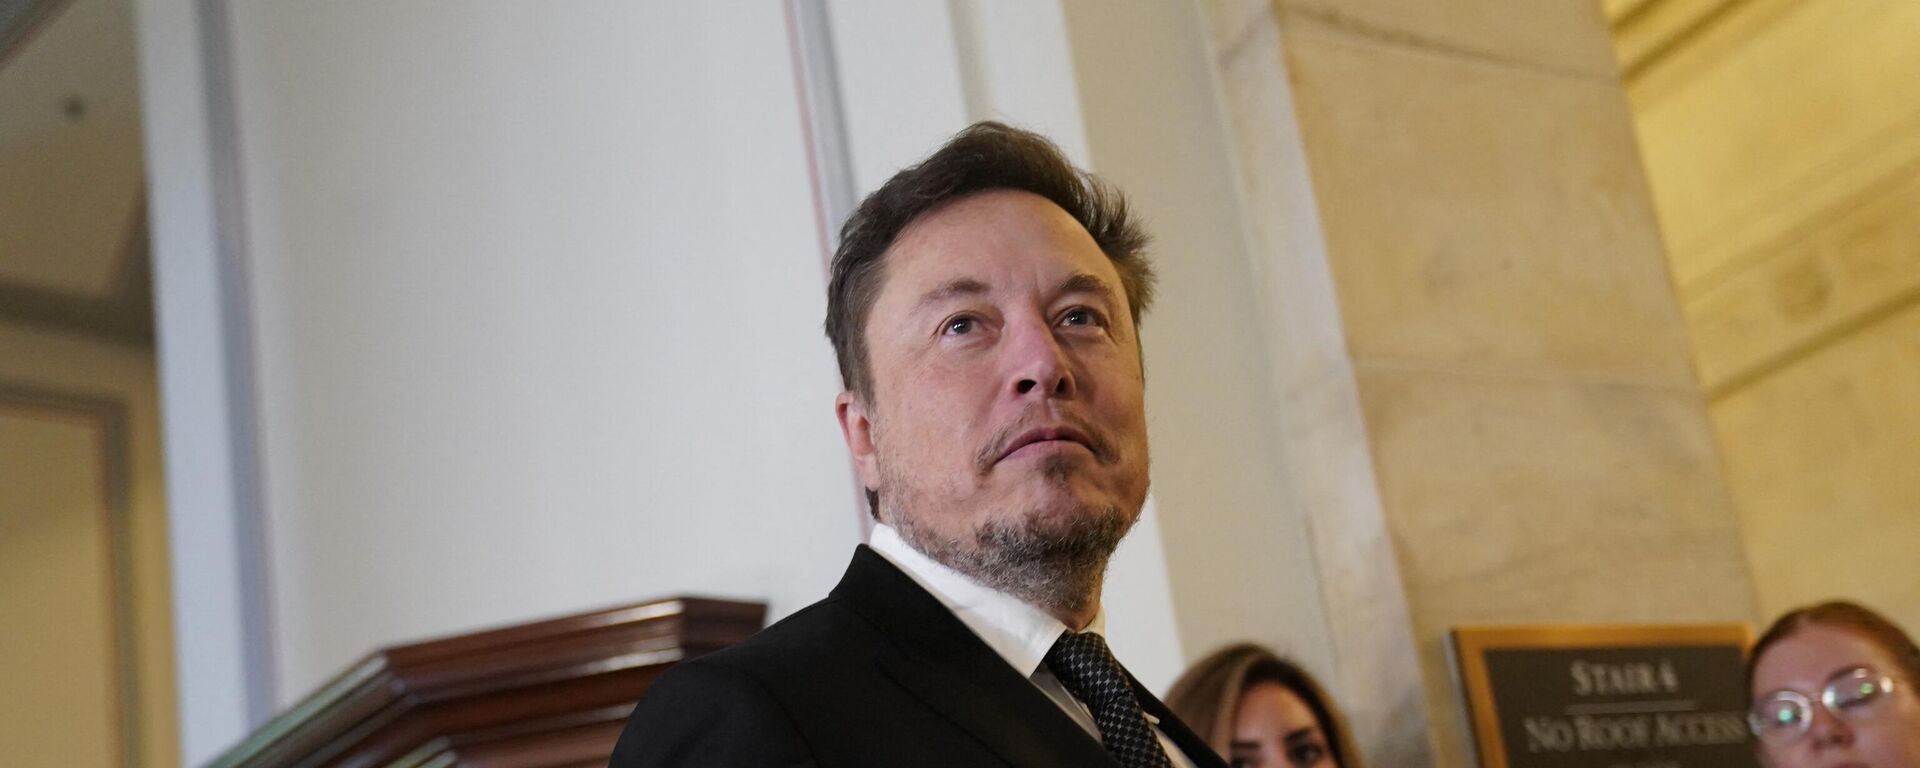 SpaceX, Twitter and electric car maker Tesla CEO Elon Musk, arrives for a US Senate bipartisan Artificial Intelligence (AI) Insight Forum at the US Capitol in Washington, DC, on September 13, 2023 - Sputnik International, 1920, 27.11.2023